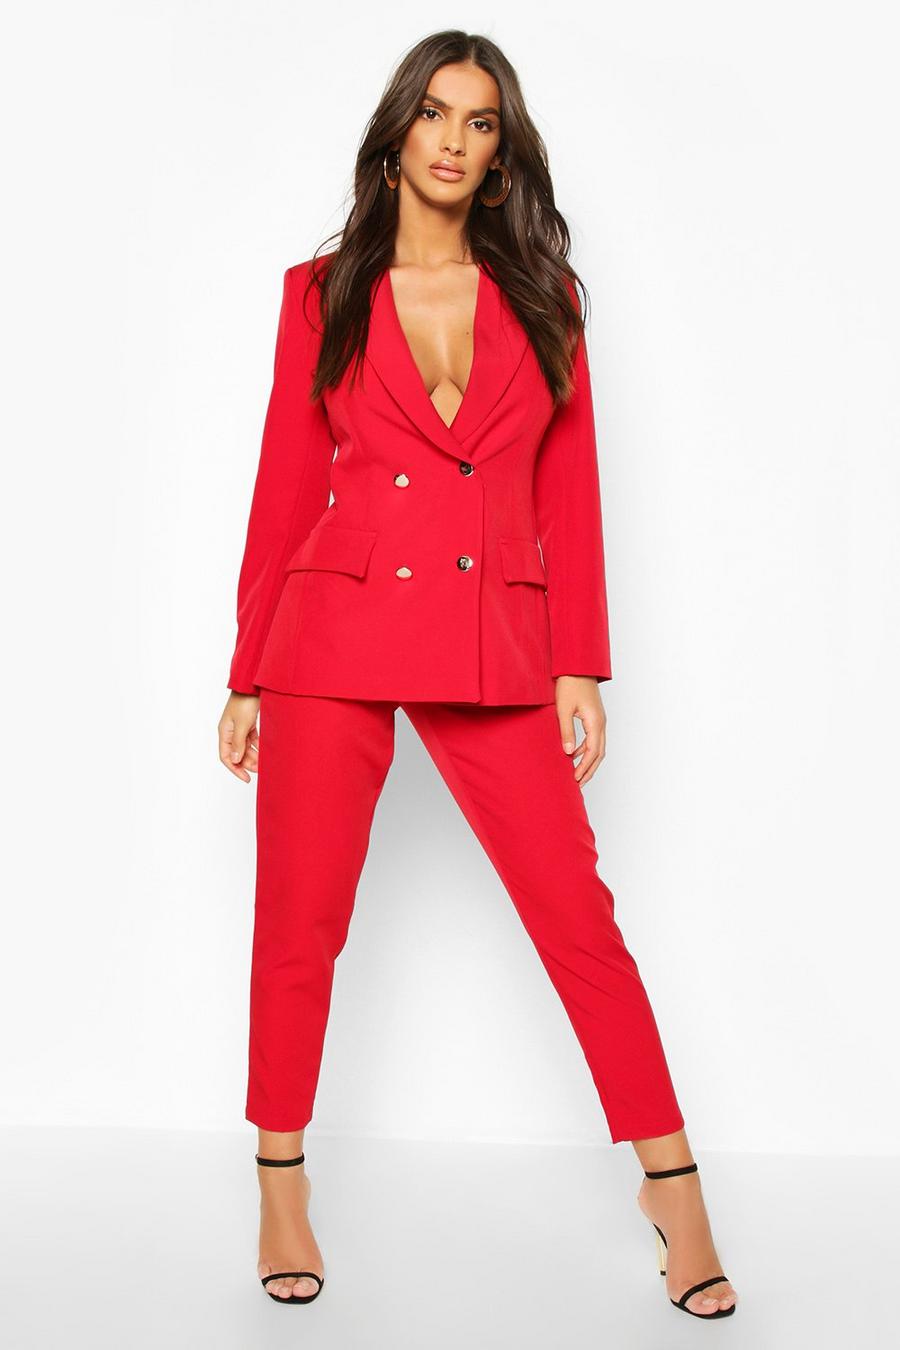 Berry red Dress Pants